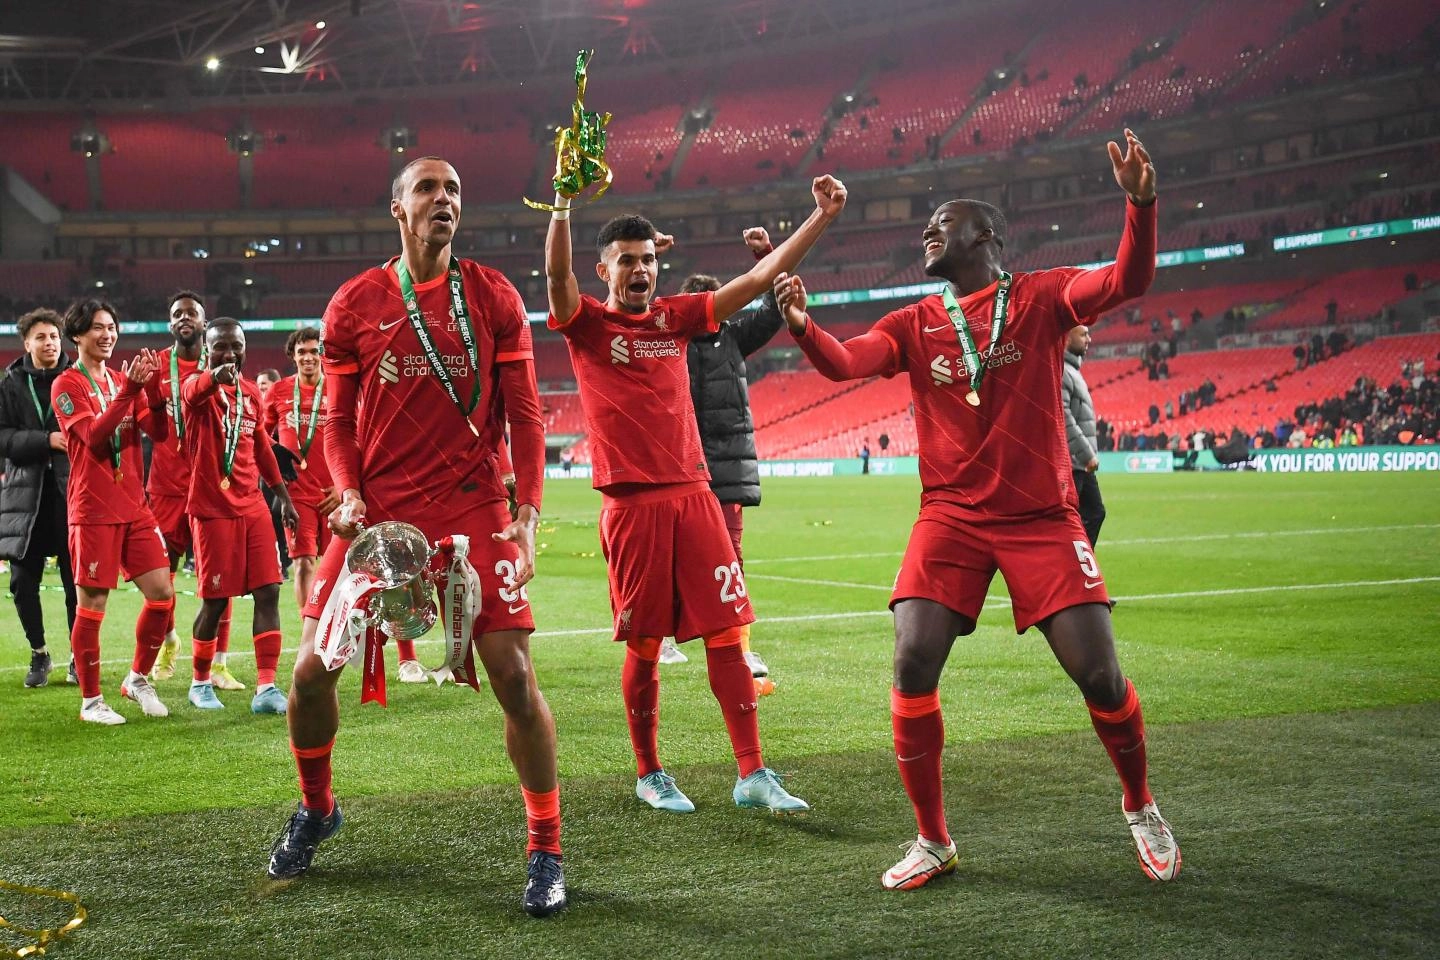 February 2022: A Carabao Cup celebration to remember